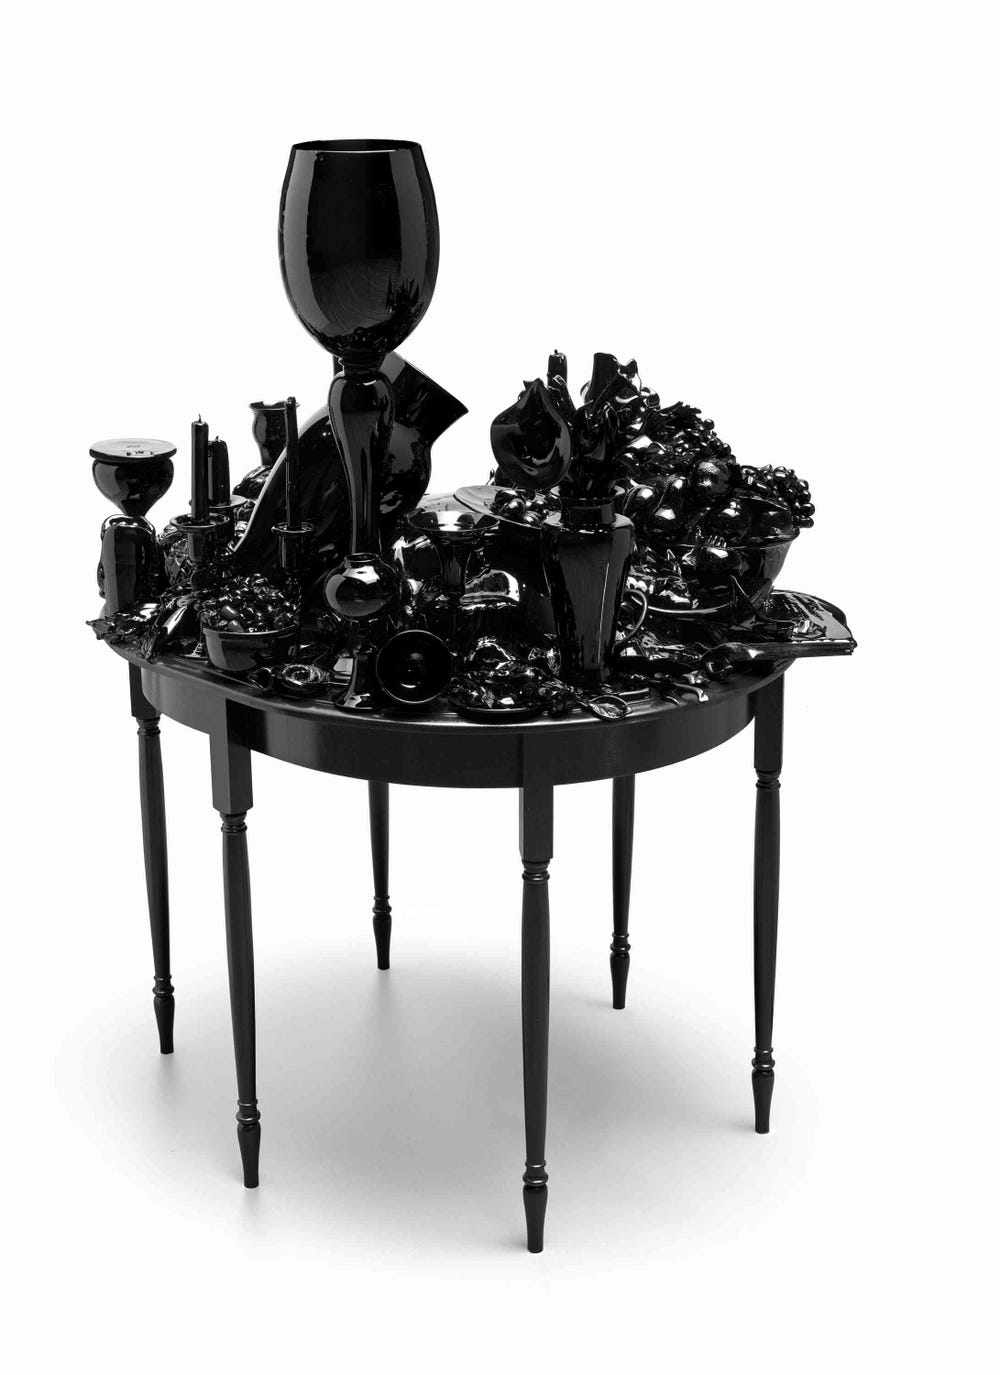 Black table covered in black objects